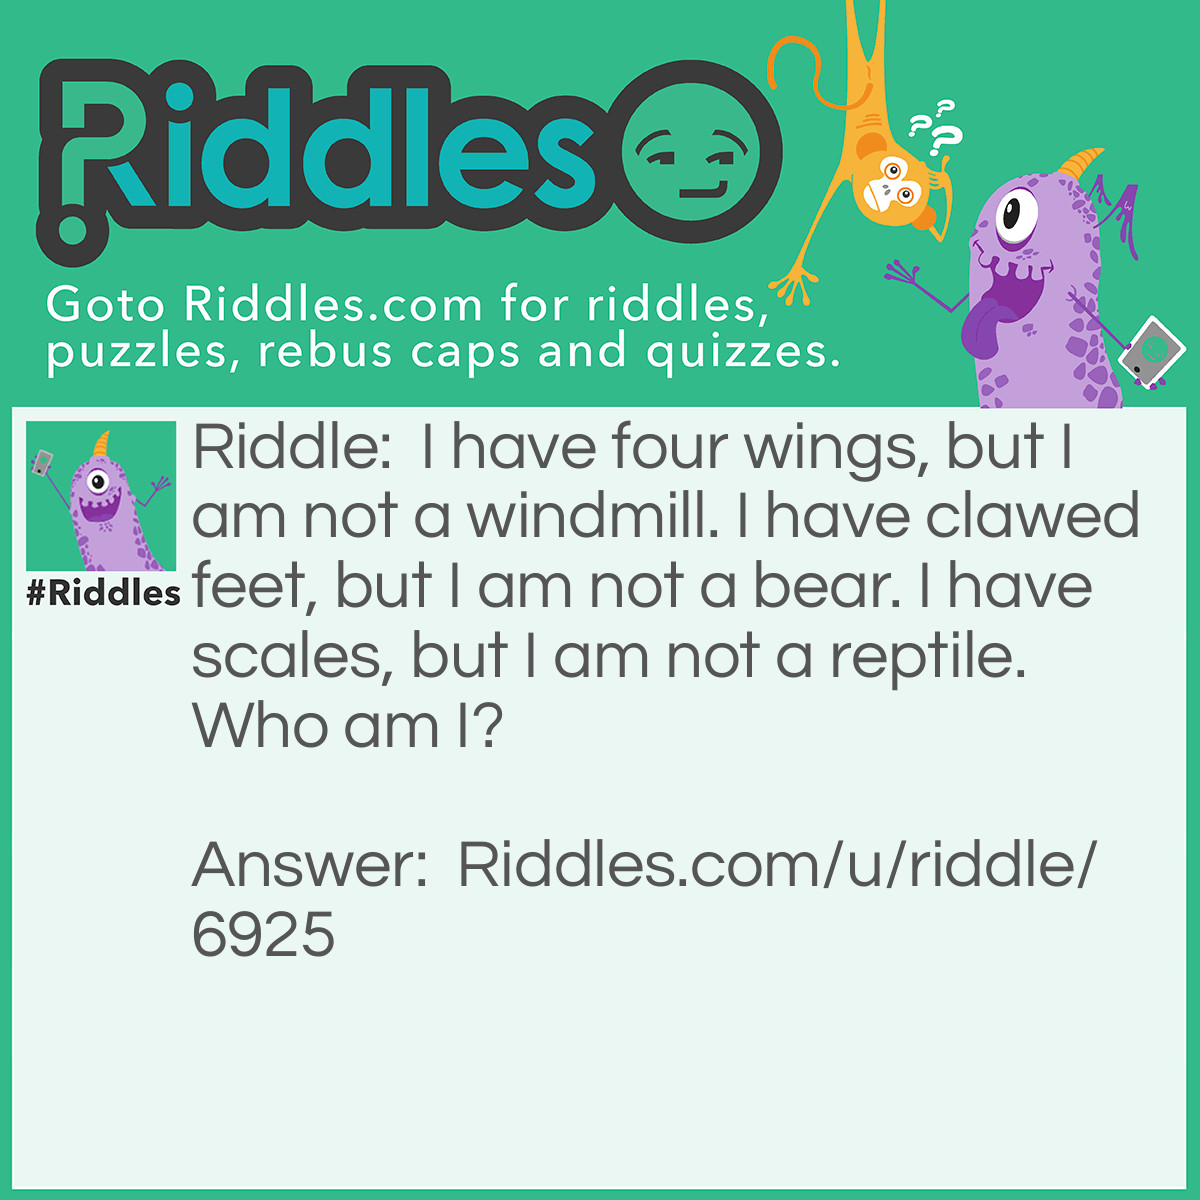 Riddle: I have four wings, but I am not a windmill. I have clawed feet, but I am not a bear. I have scales, but I am not a reptile. Who am I? Answer: A butterfly OR A dragonfly